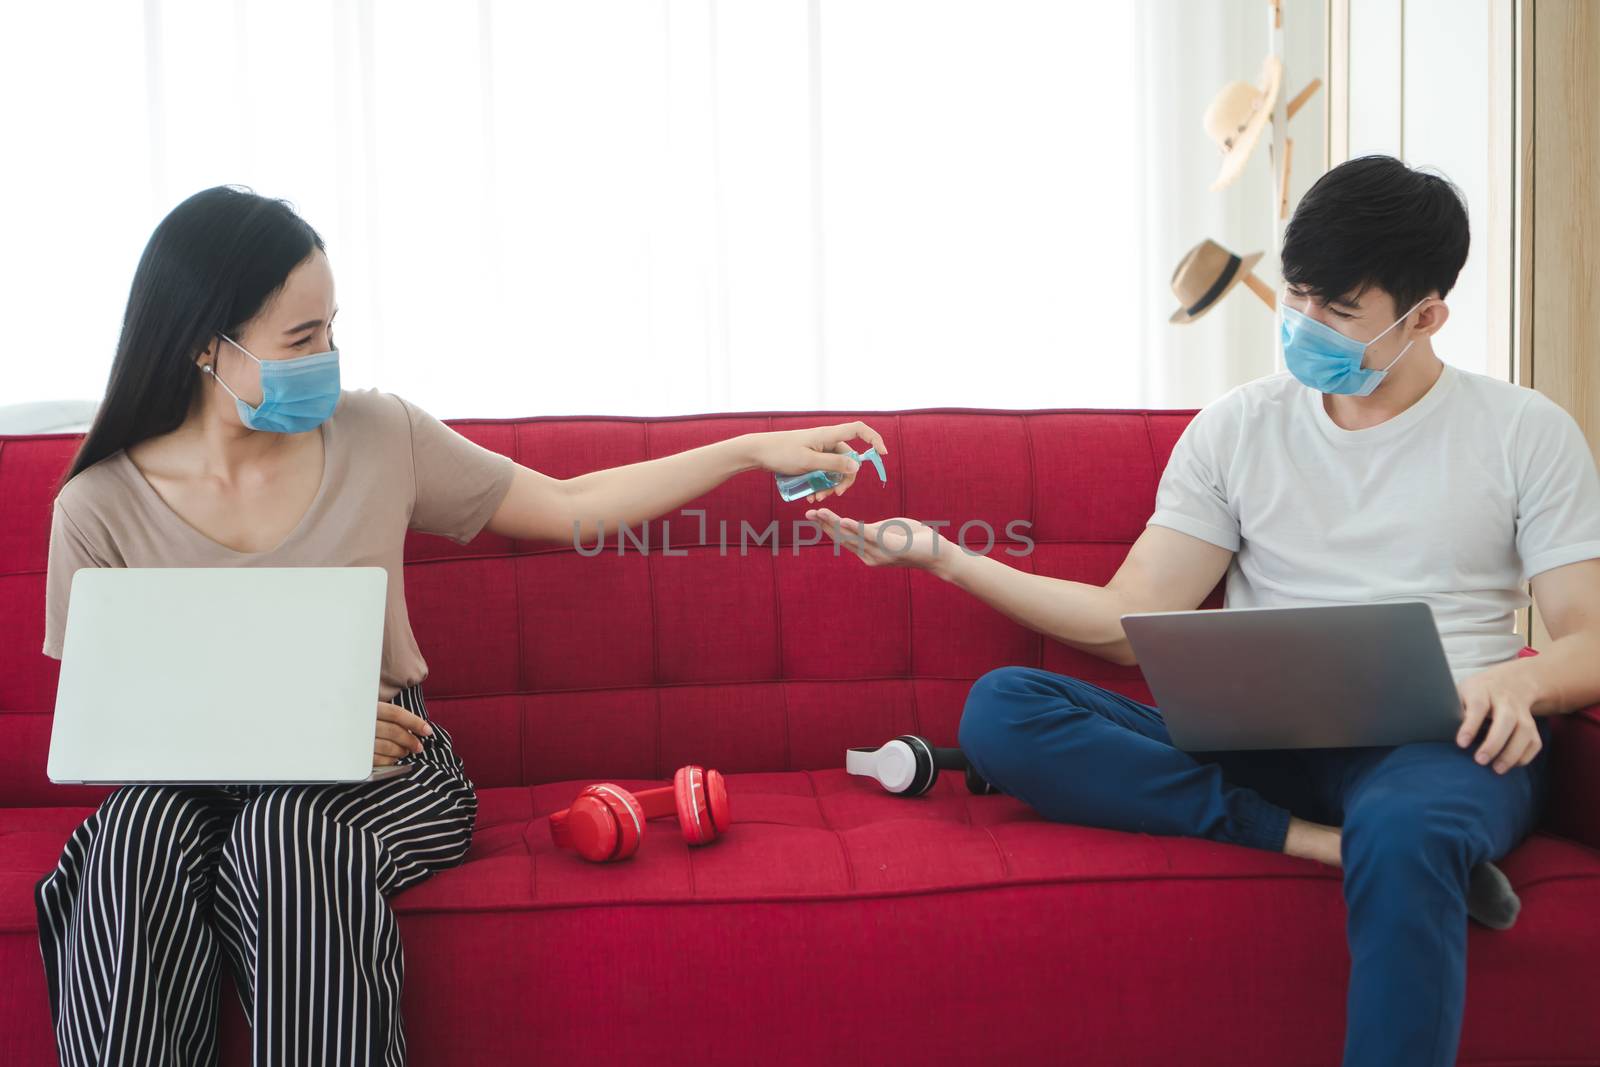 Asian men and women wear medical masks, work from home. Is a distance from society To prevent the spread of Coronavirus